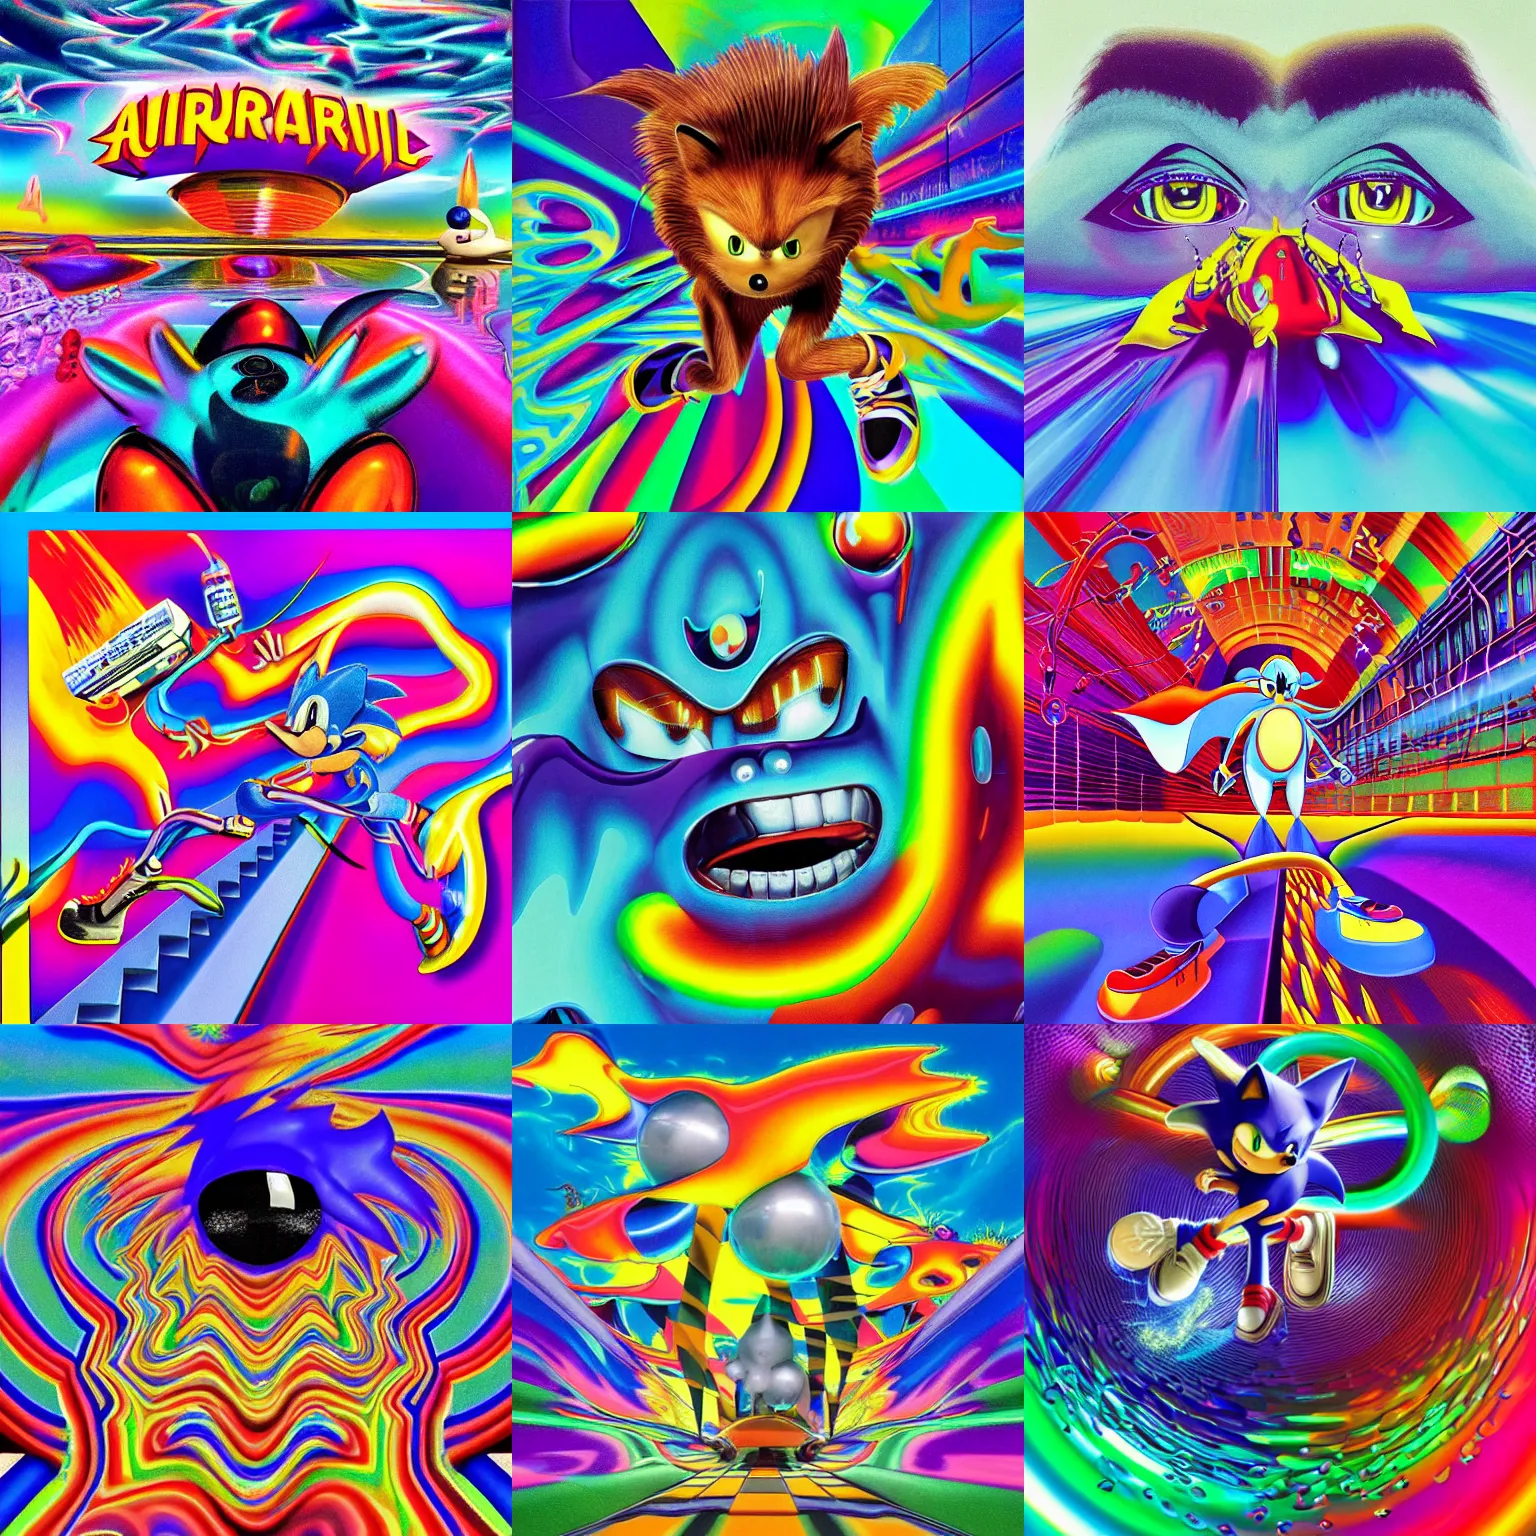 Prompt: surreal, detailed hyperrealistic sonic portrait professional, high quality airbrush art tame impala album cover of a liquid dissolving airbrush art lsd dmt sonic the hedgehog dashing through cyberspace, purple checkerboard background, 1 9 8 0 s 1 9 8 2 sega genesis video game album cover